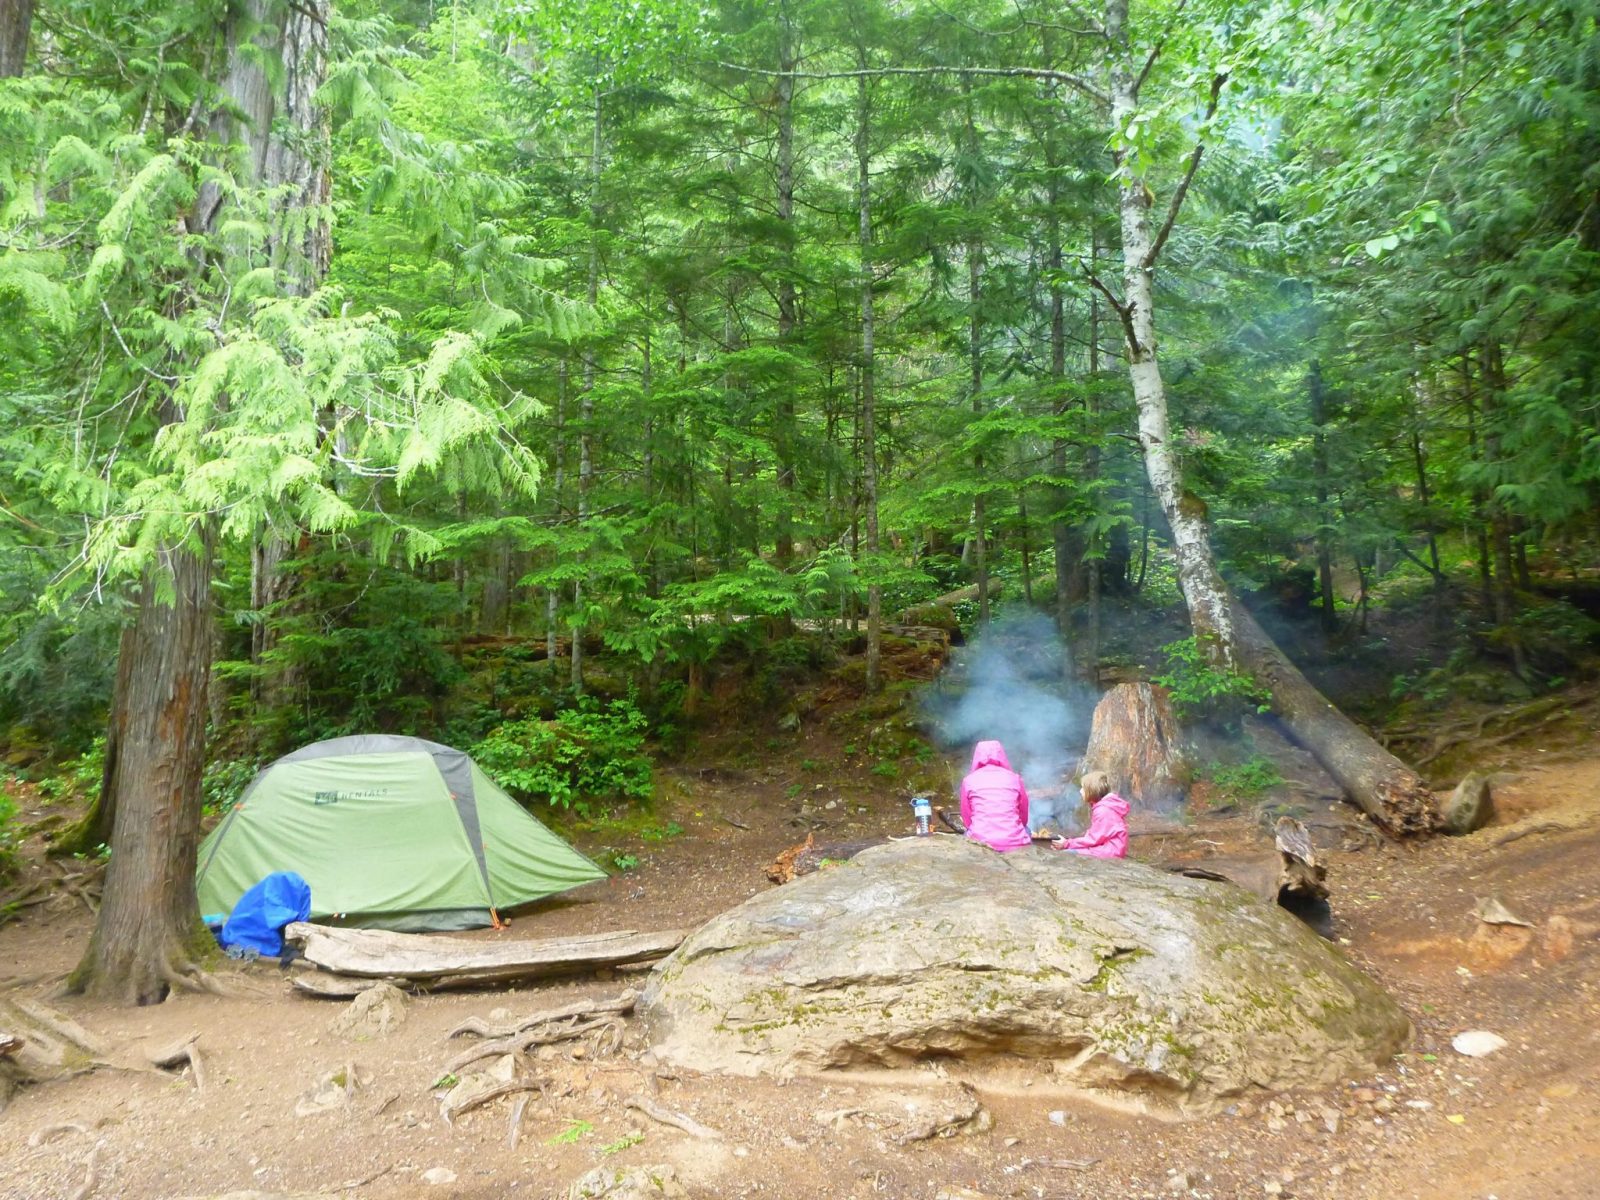 An adult and a child wearing pink rain coats sitting next to a campfire. There is a big boulder next to them and a green tent. The campsite is surrounded by trees.